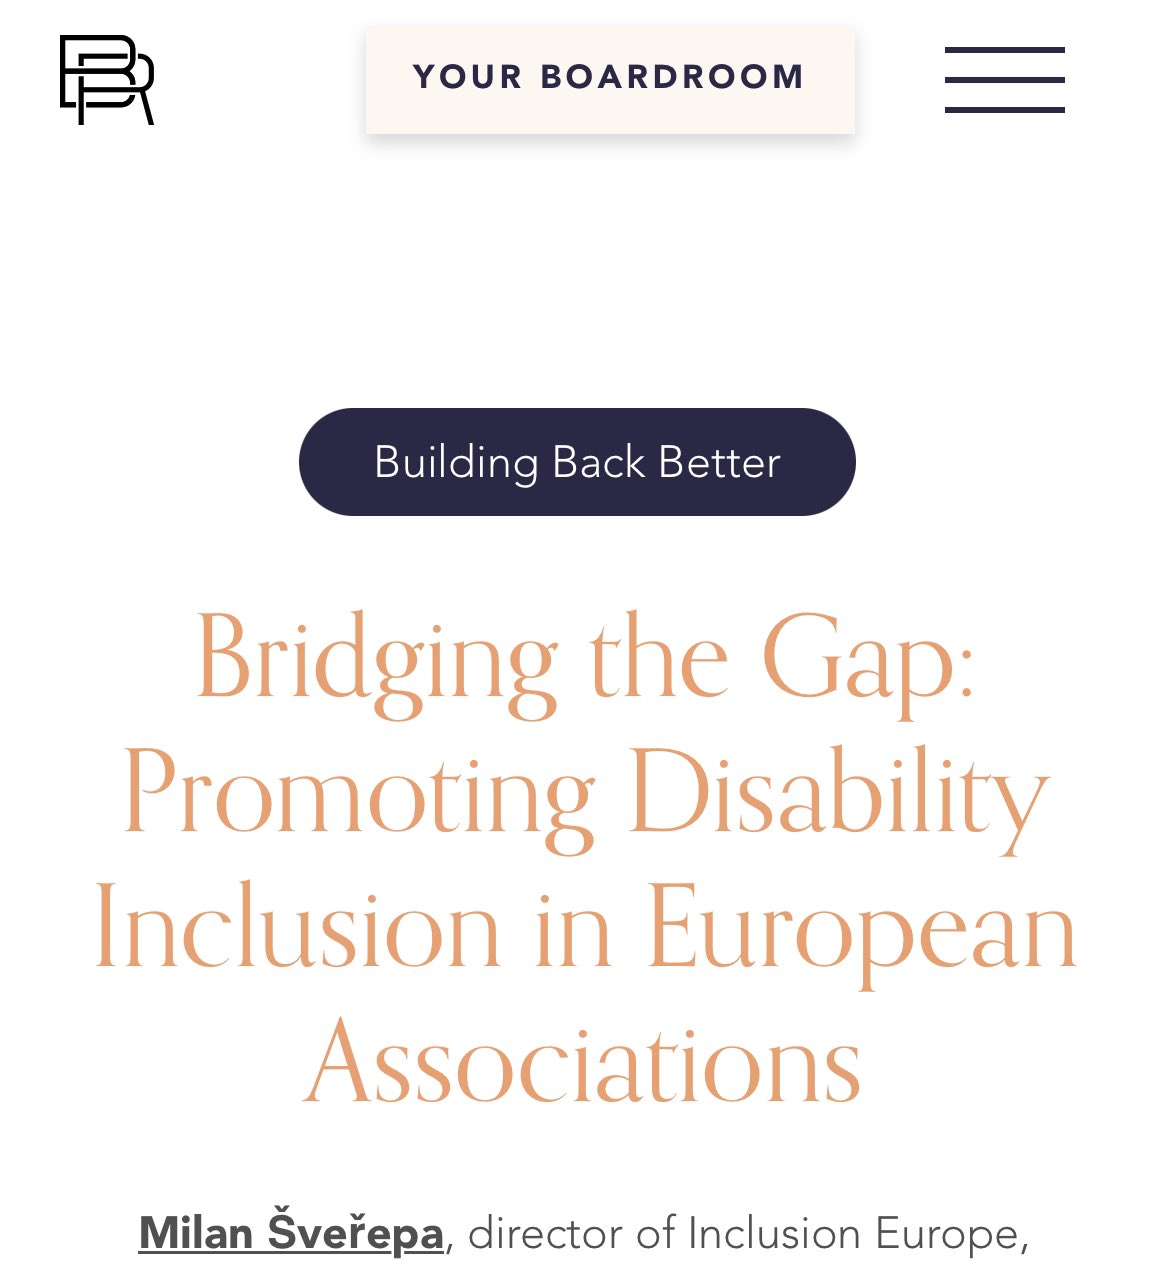 Bridging the gap: Promoting disability inclusion in European associations